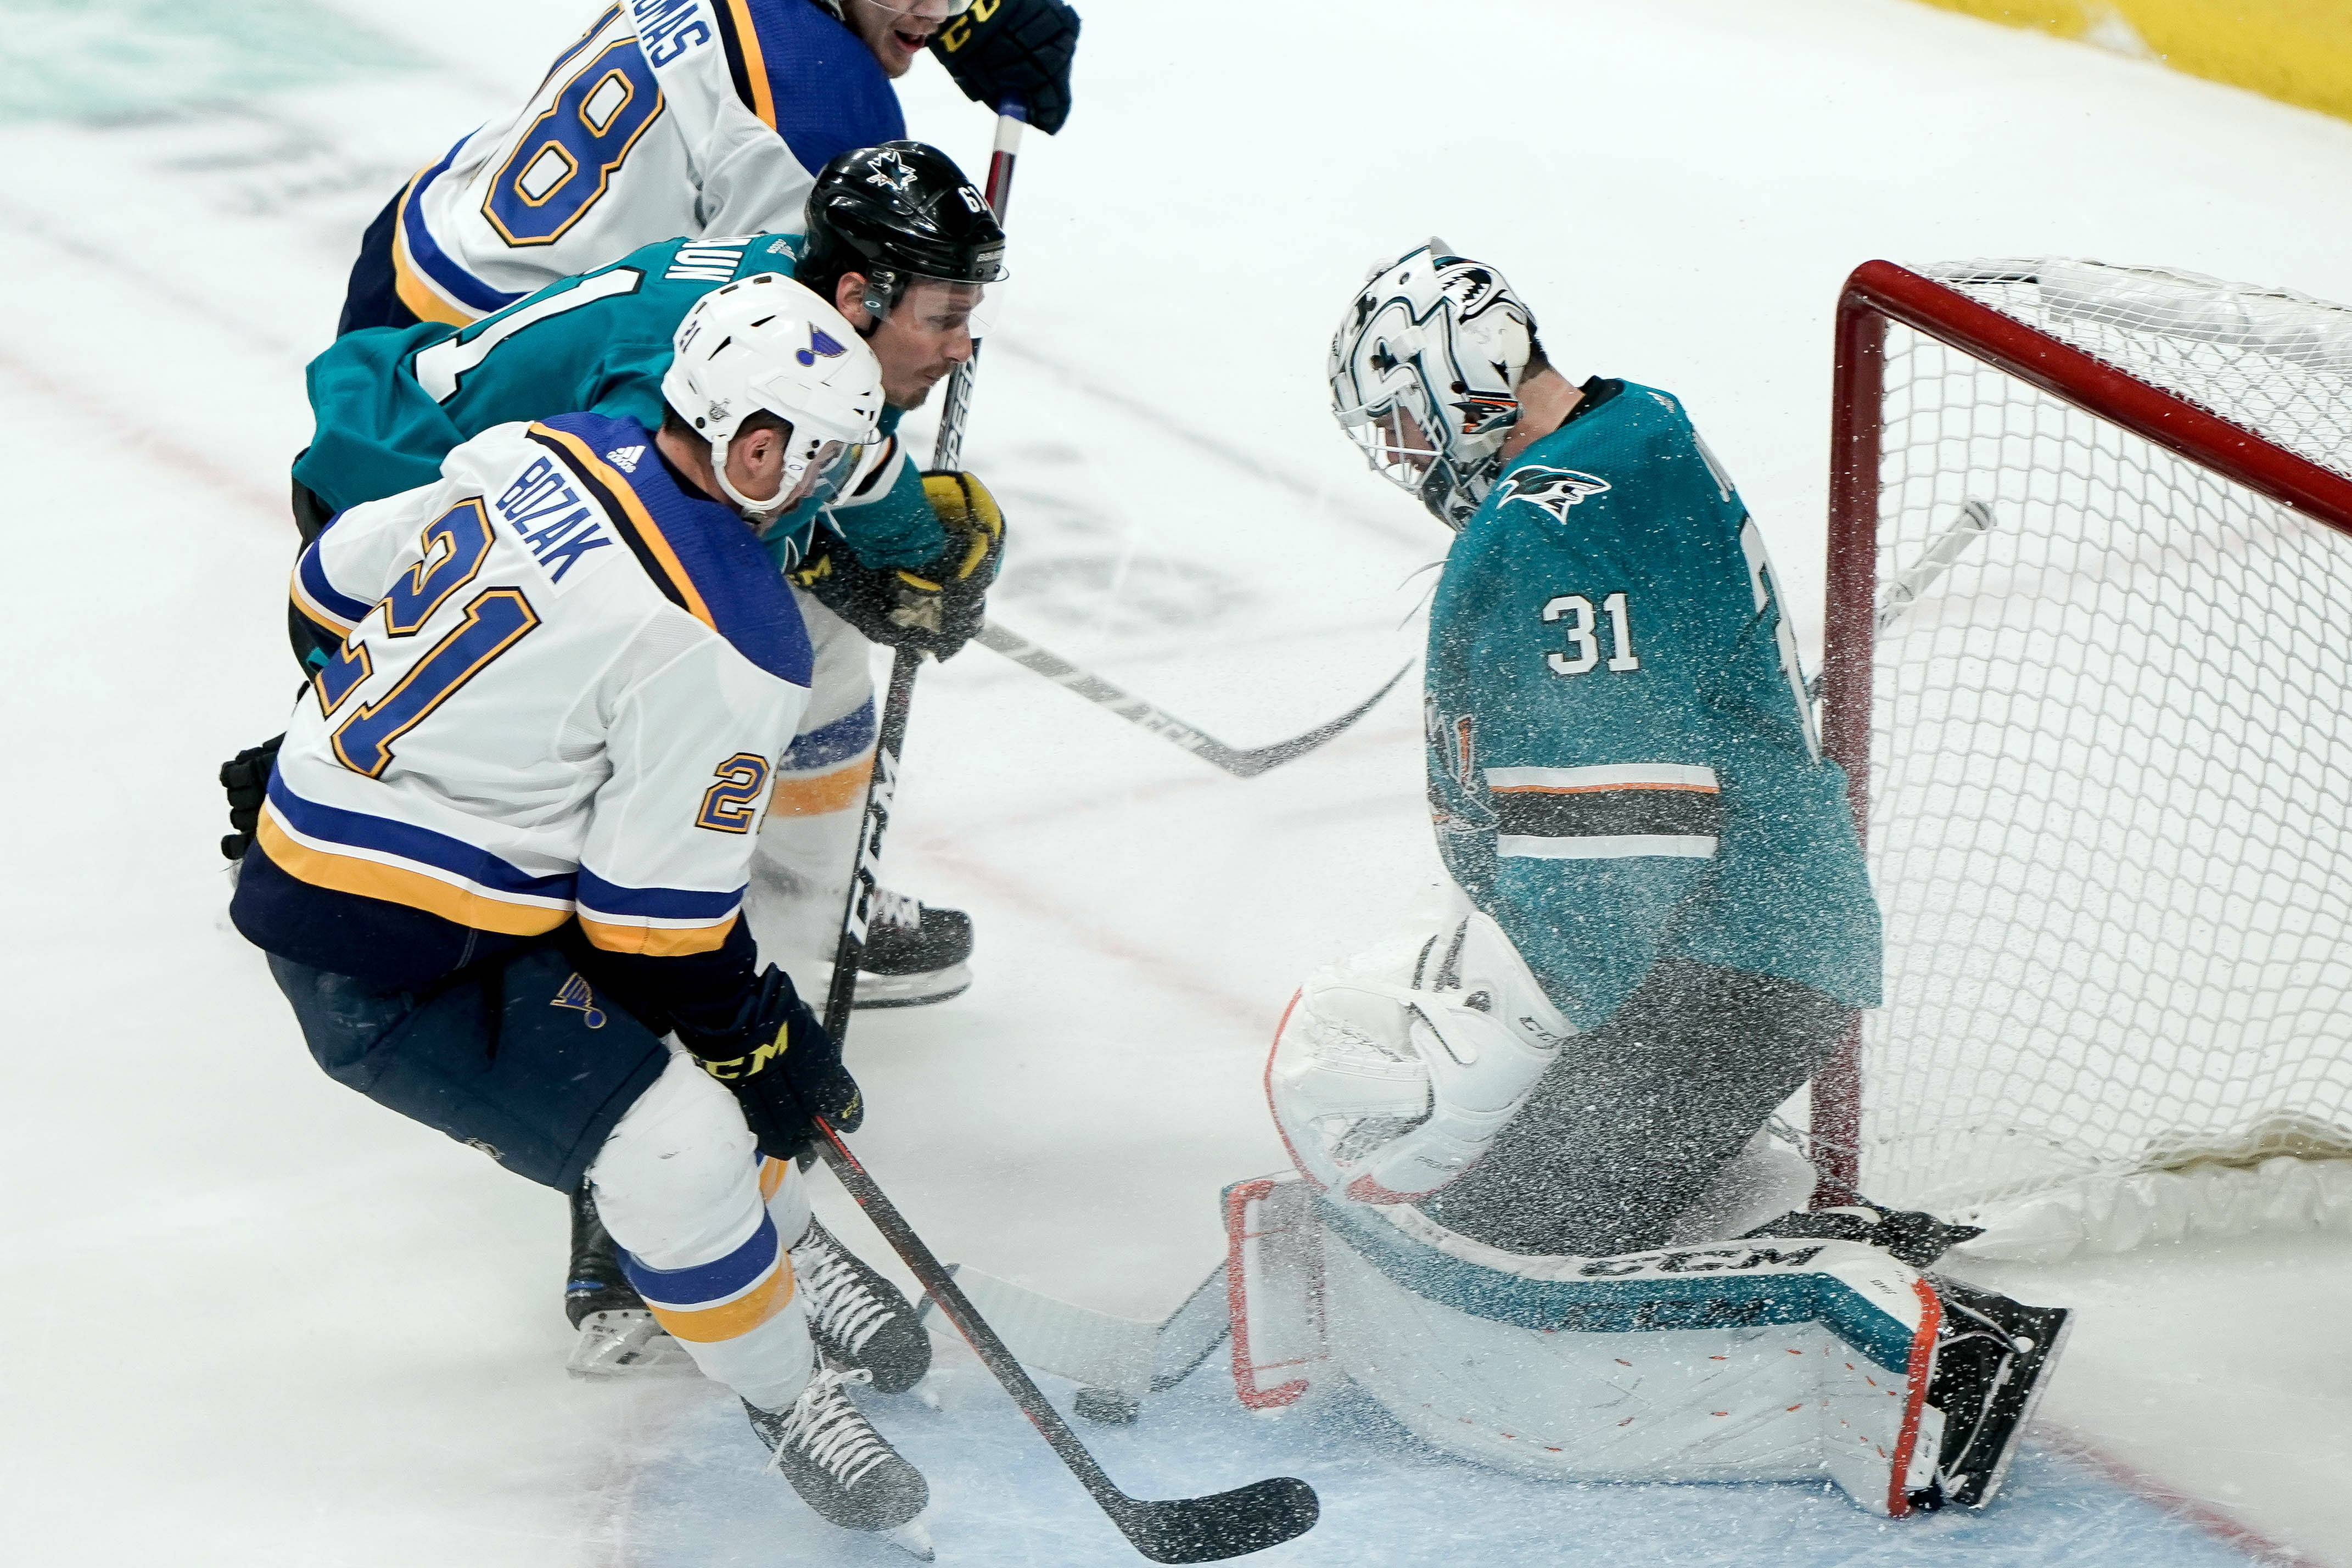 2019-05-12T013612Z_497308933_NOCID_RTRMADP_3_NHL-STANLEY-CUP-PLAYOFFS-ST-LOUIS-BLUES-AT-SAN-JOSE-SHARKS